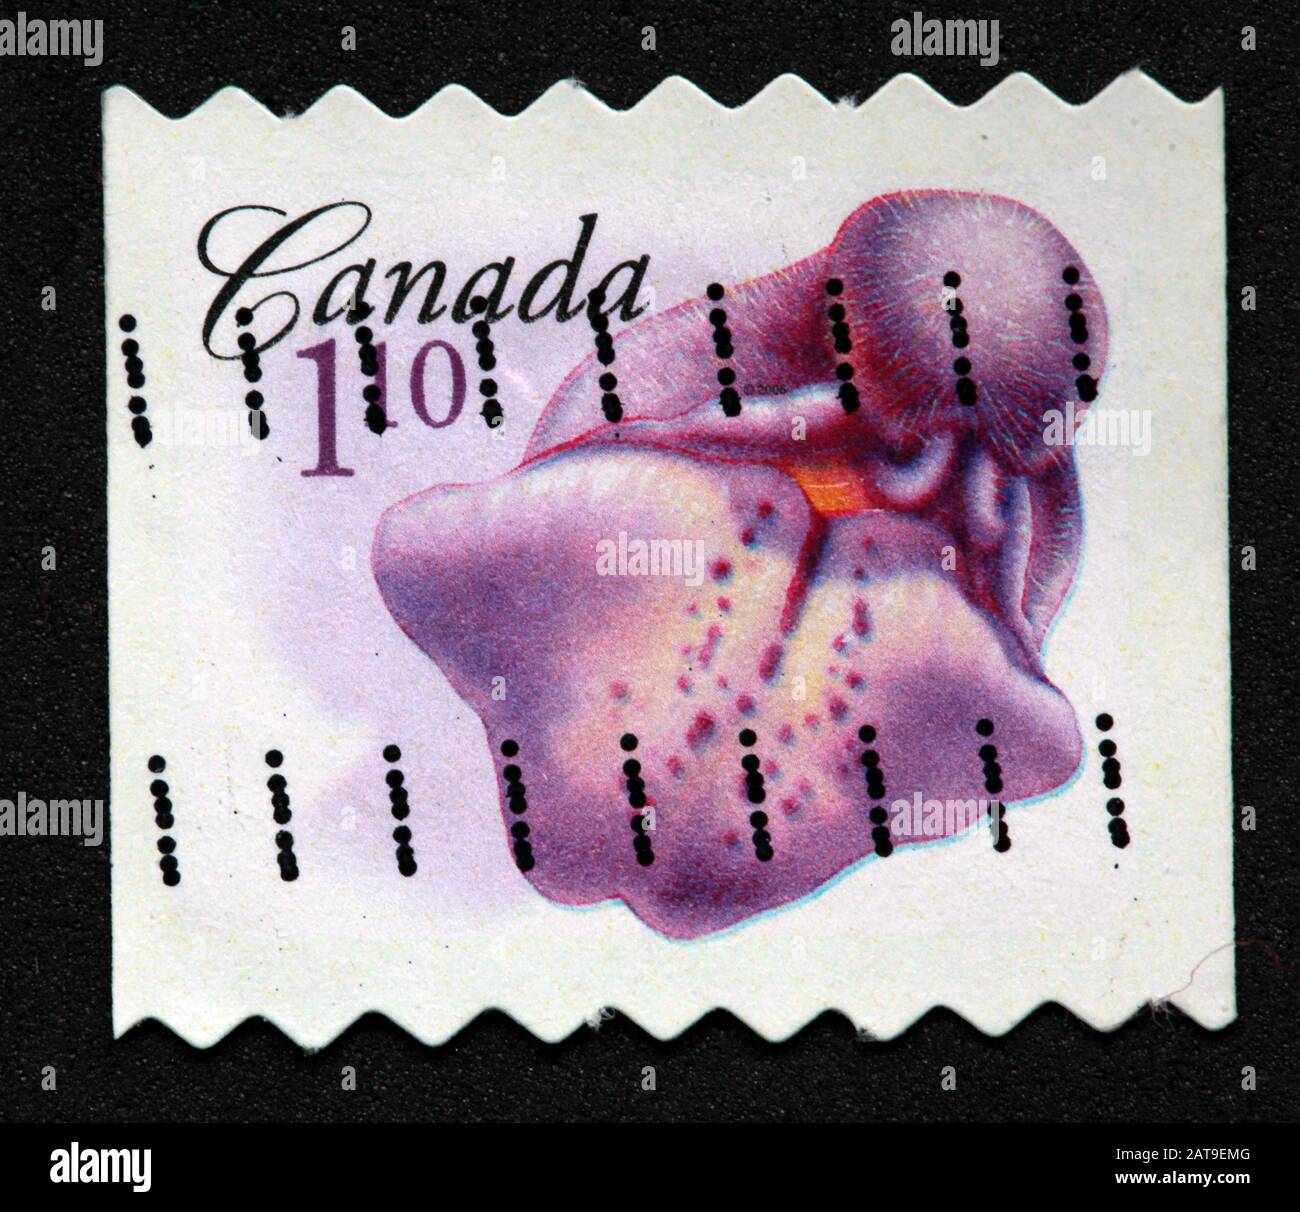 Canadian Stamp, Canada Stamp, Canada Post,used stamp, Canada, bladderwort, 1.10, $1.10, purple, carnivorous plant Stock Photo